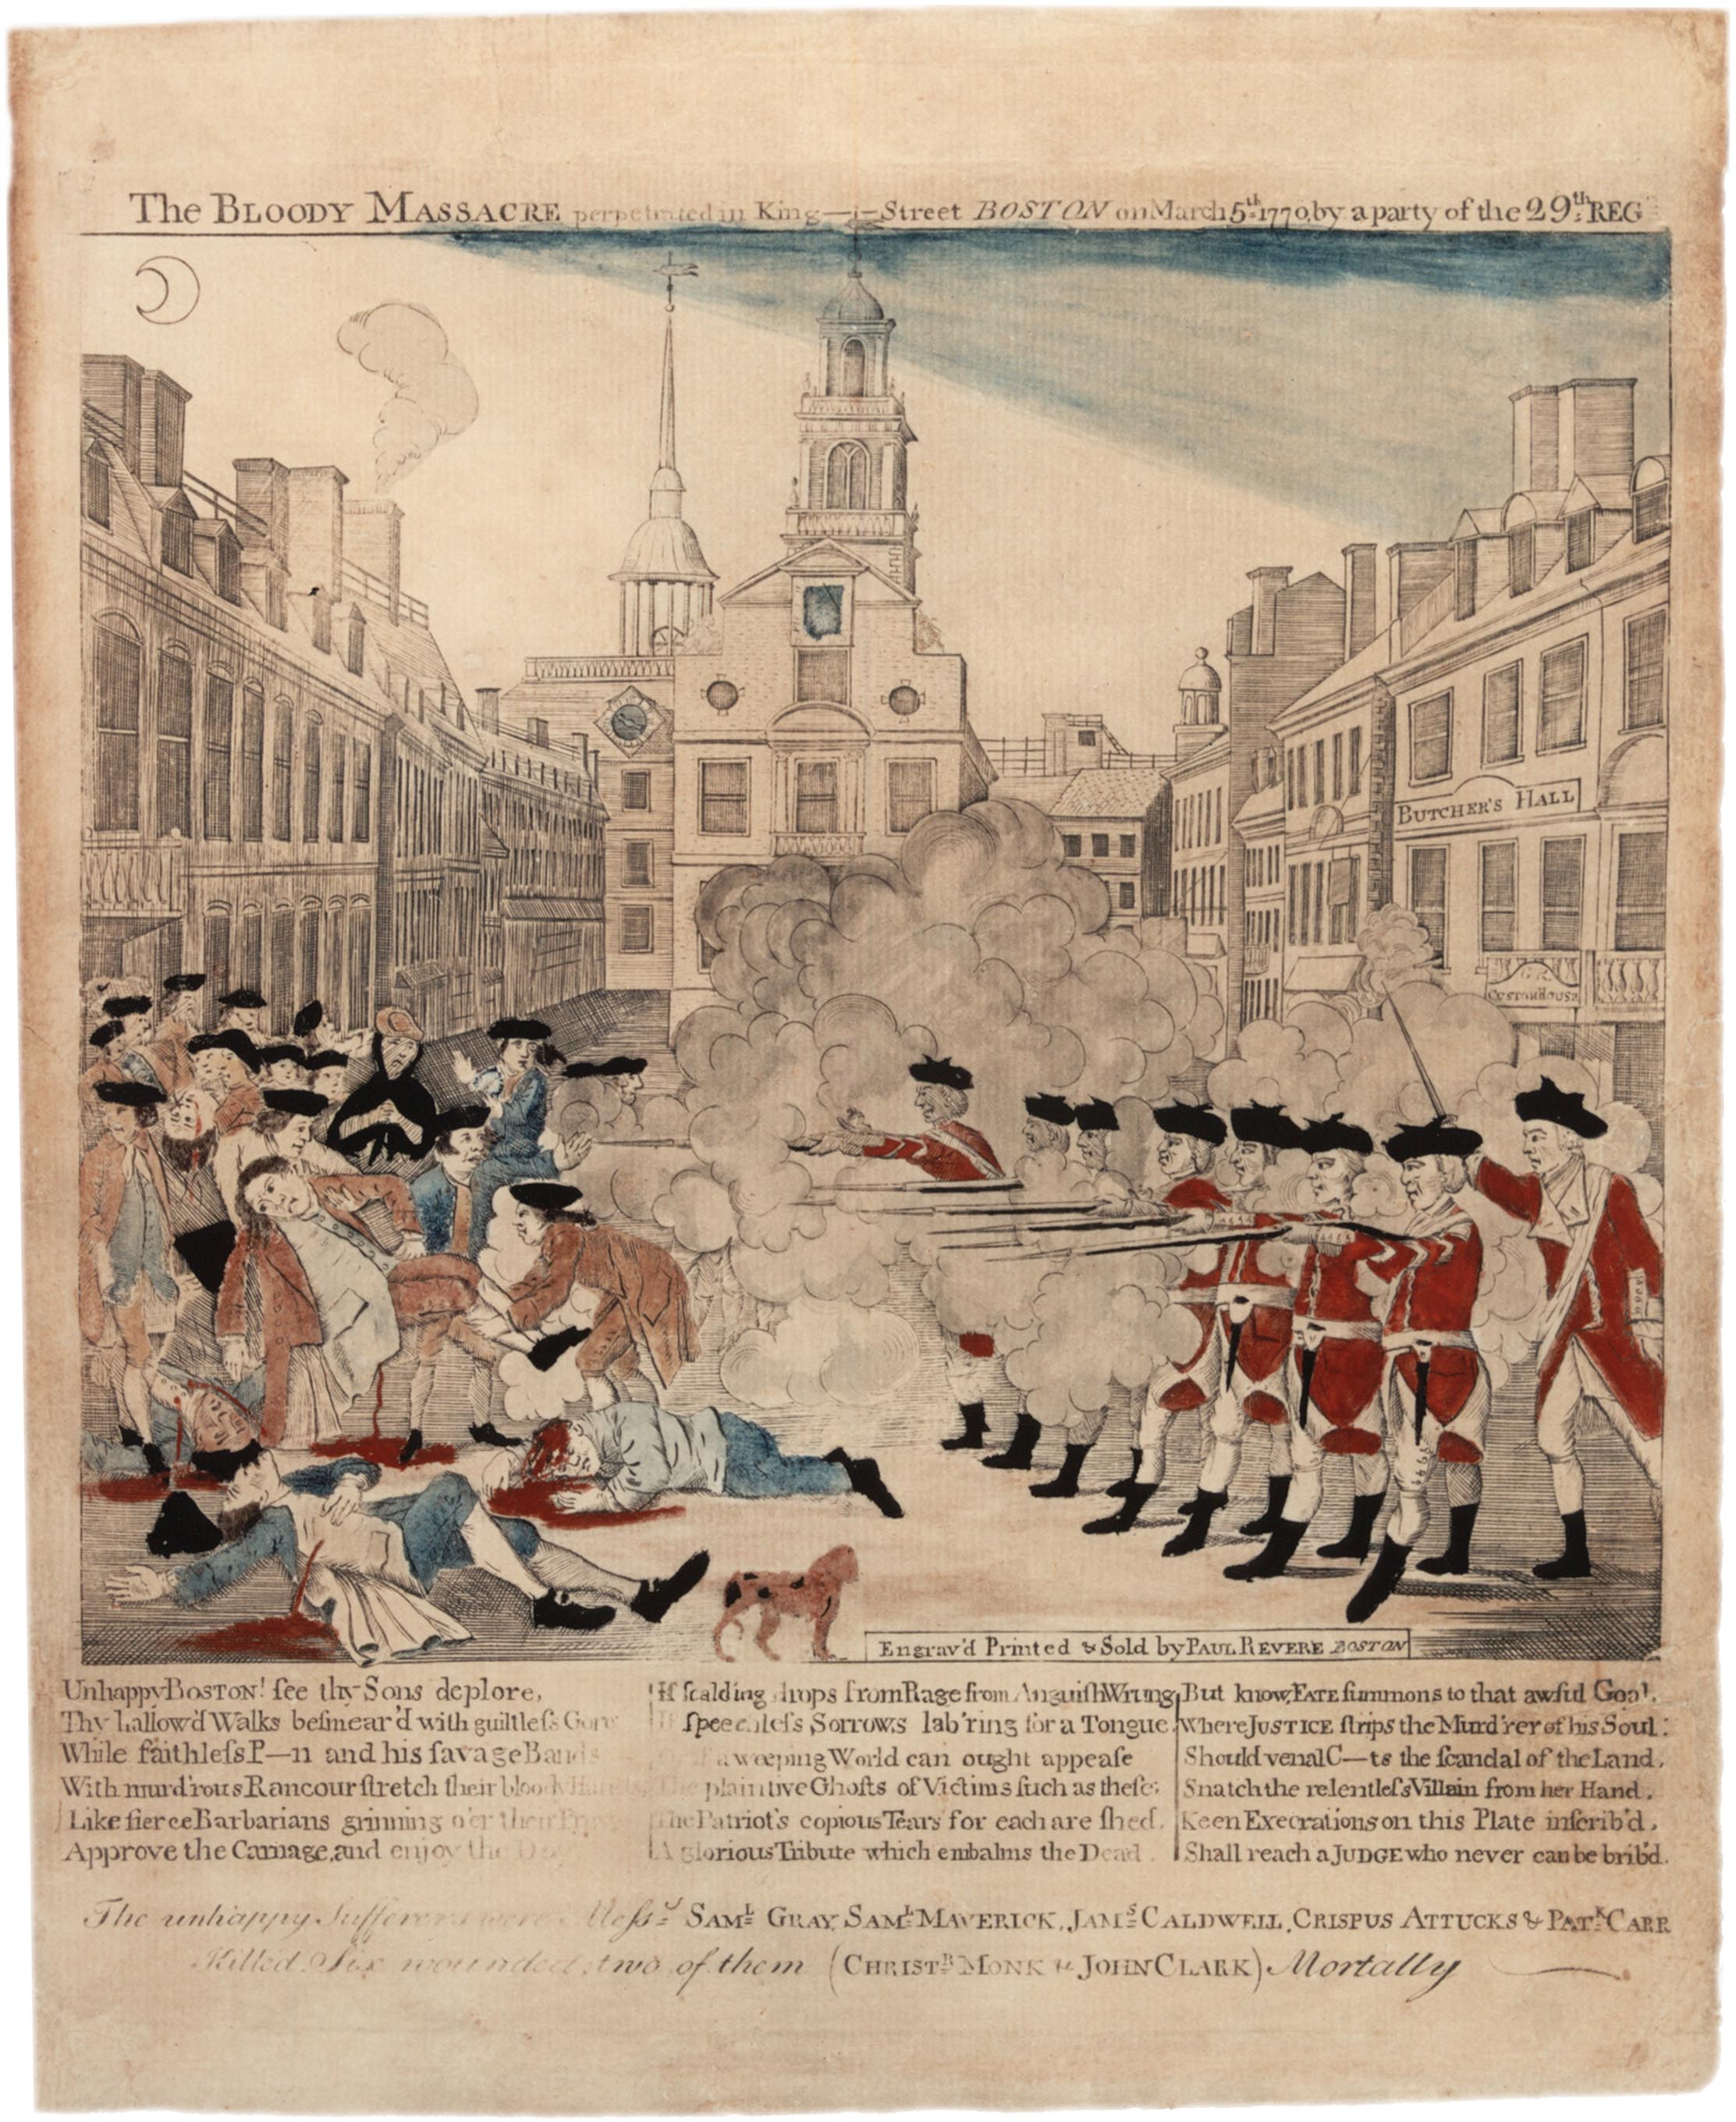 "The Bloody Massacre" engraved by Paul Revere, 1770 (The Gilder Lehrman Institute)